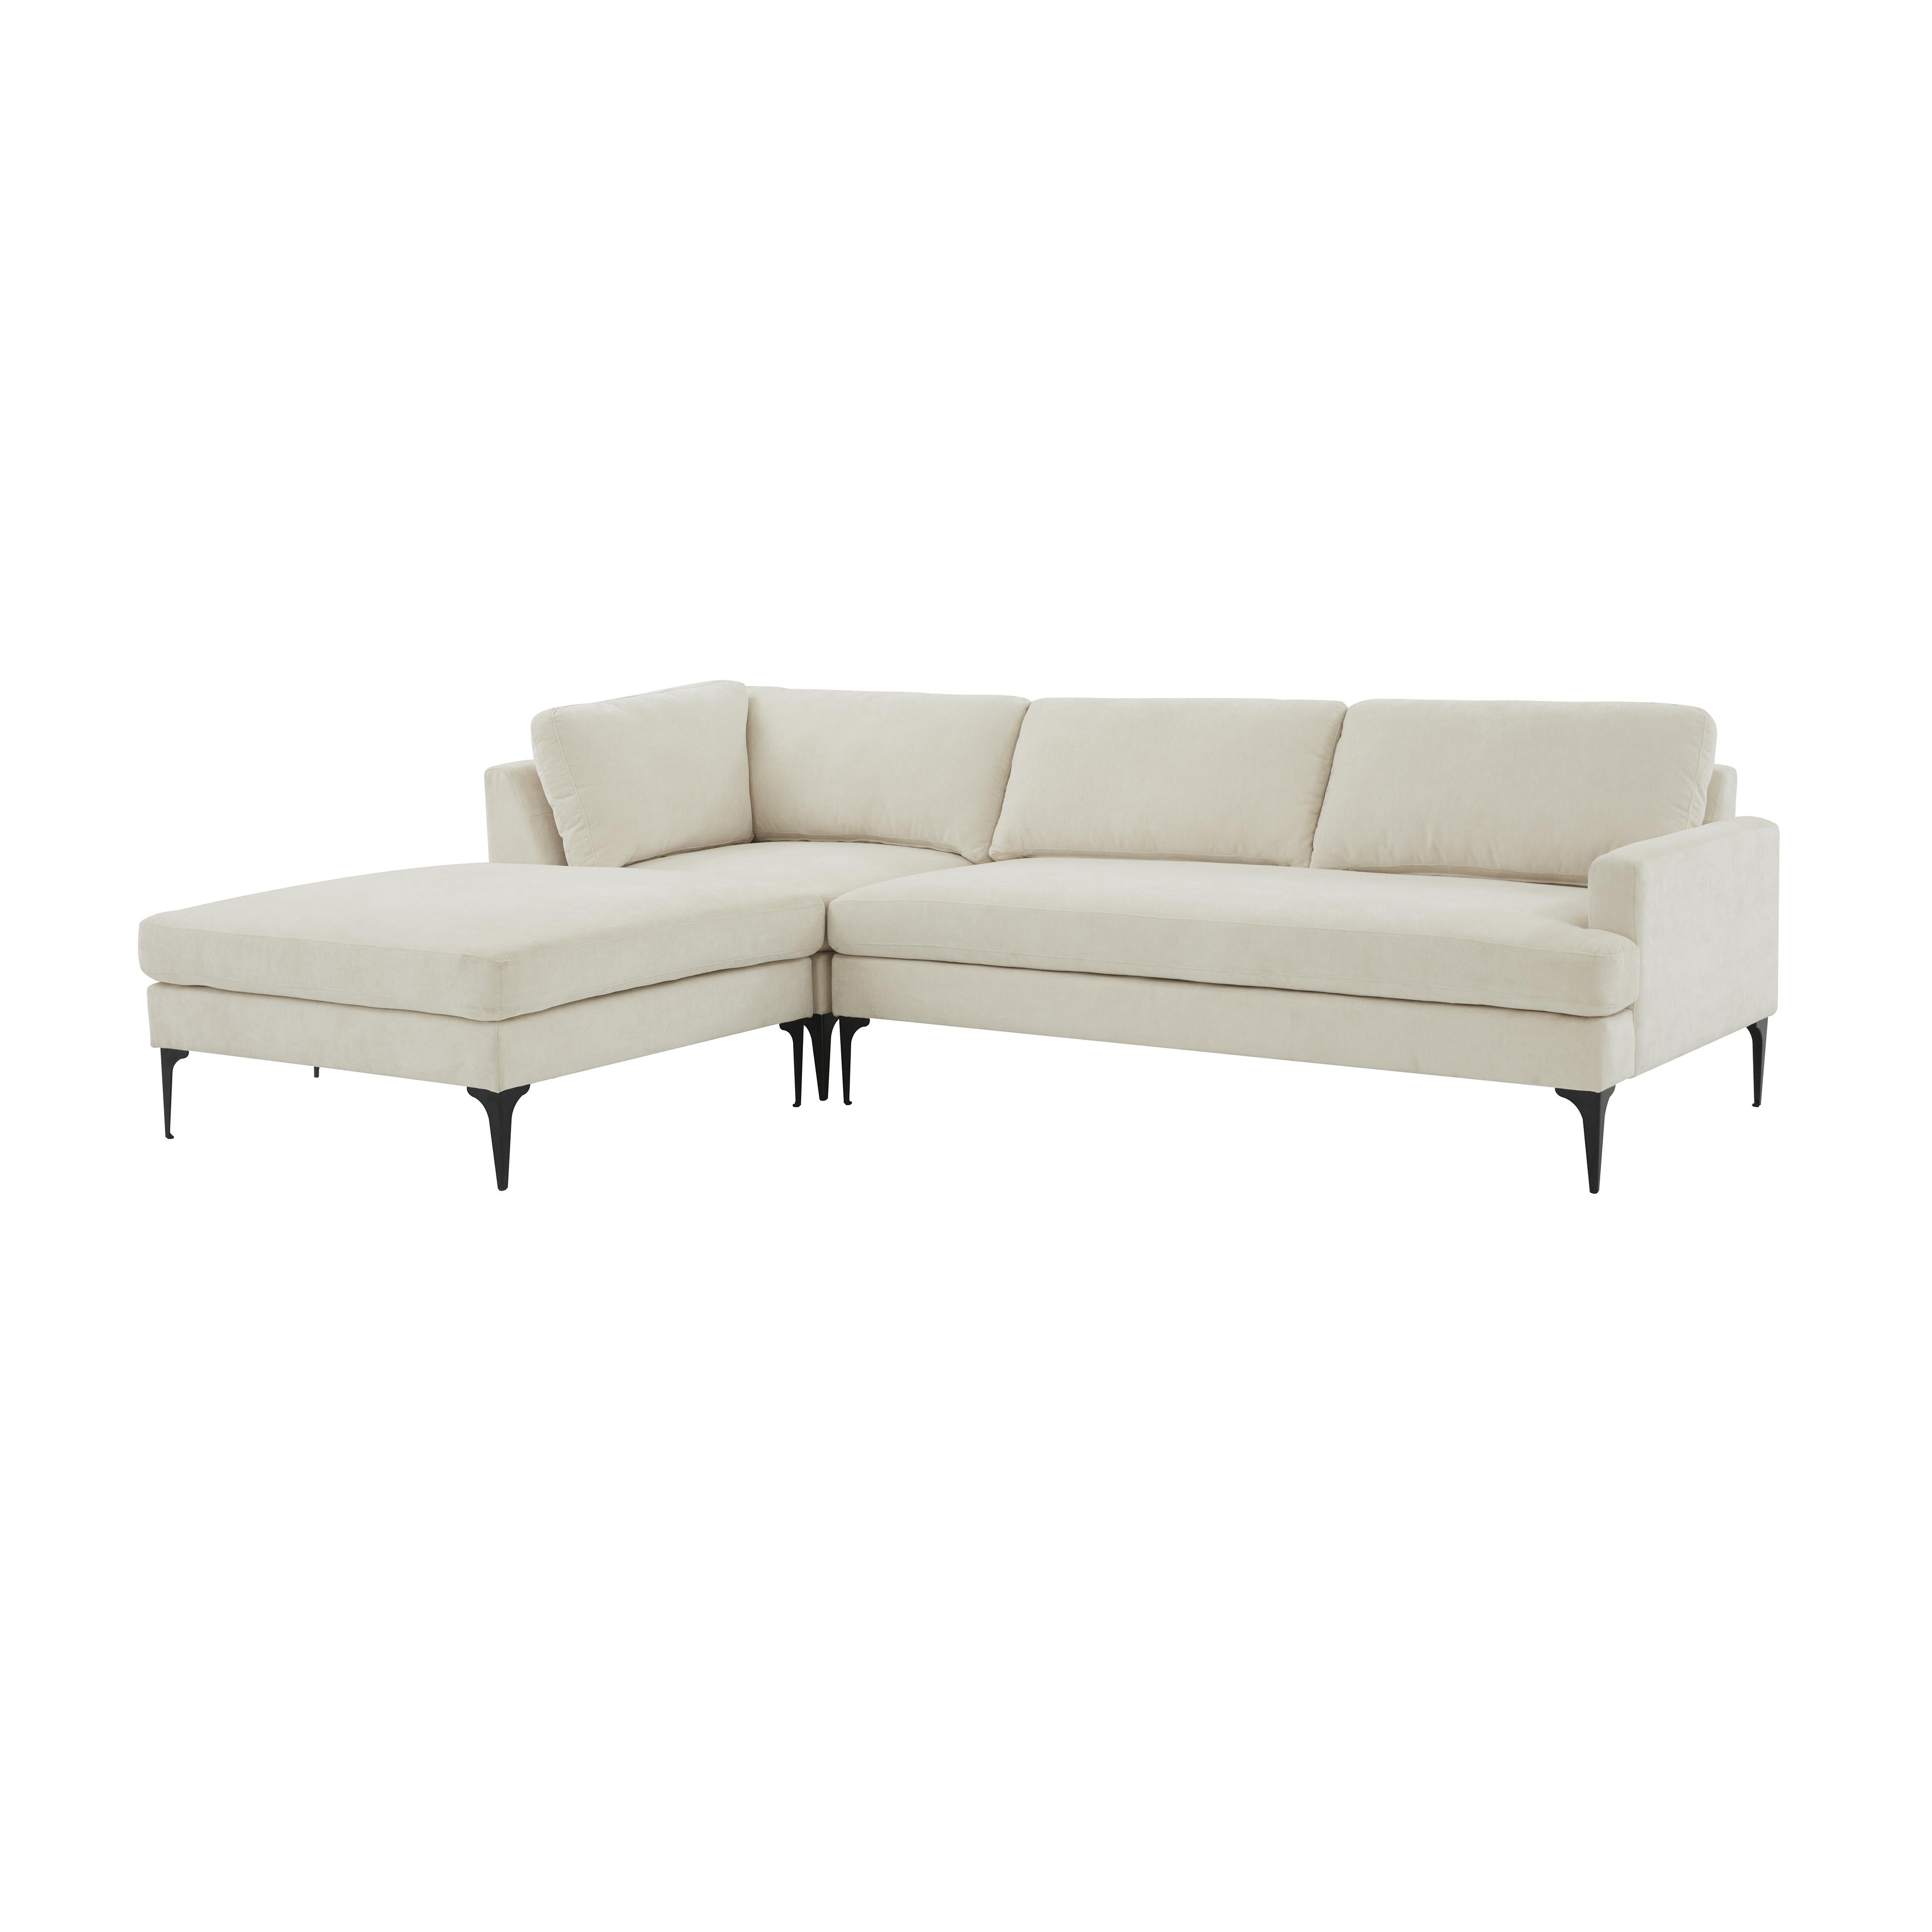 Tov Furniture Sectionals - Serena Cream Velvet LAF Chaise Sectional with Black Legs